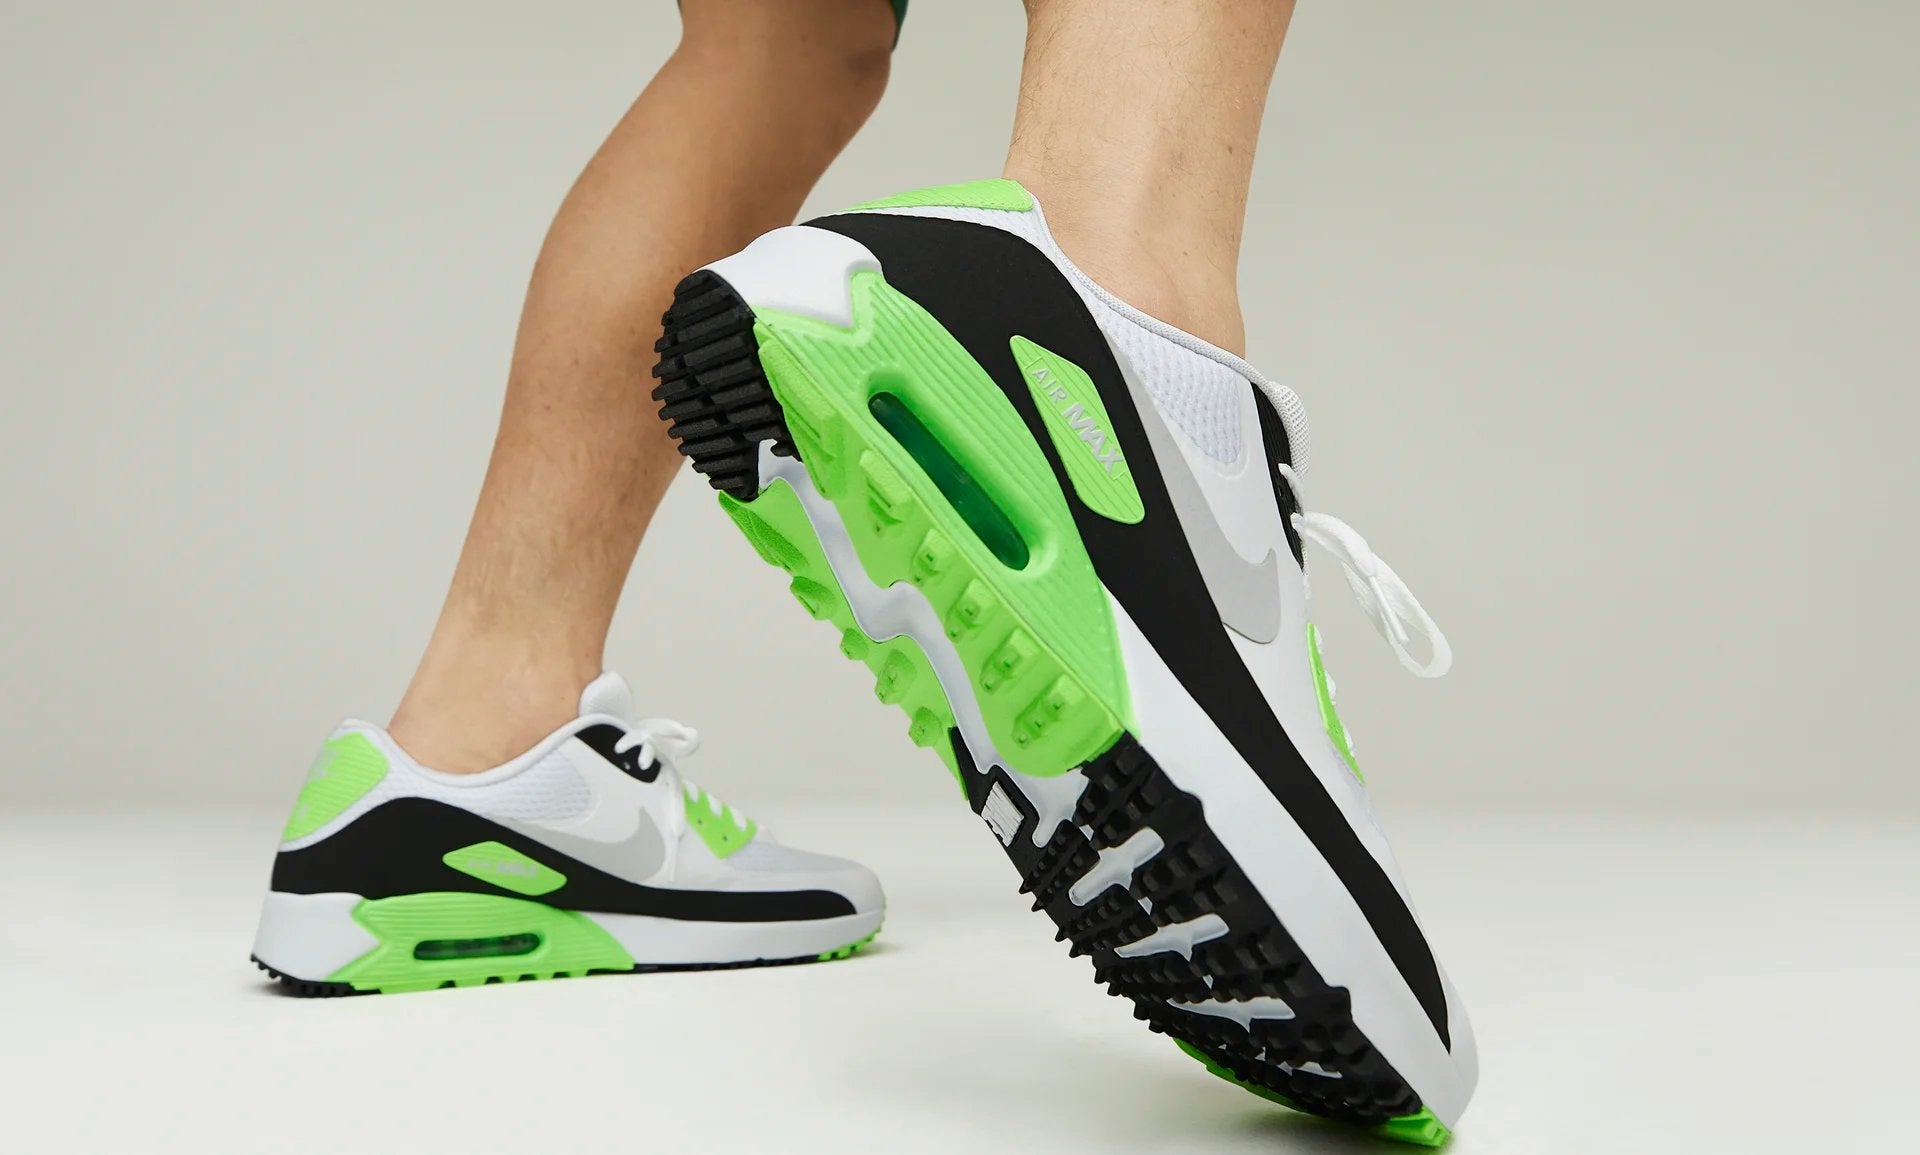 Golf Shoes | Spiked & Spikeless Golf Shoes Desirable Golf